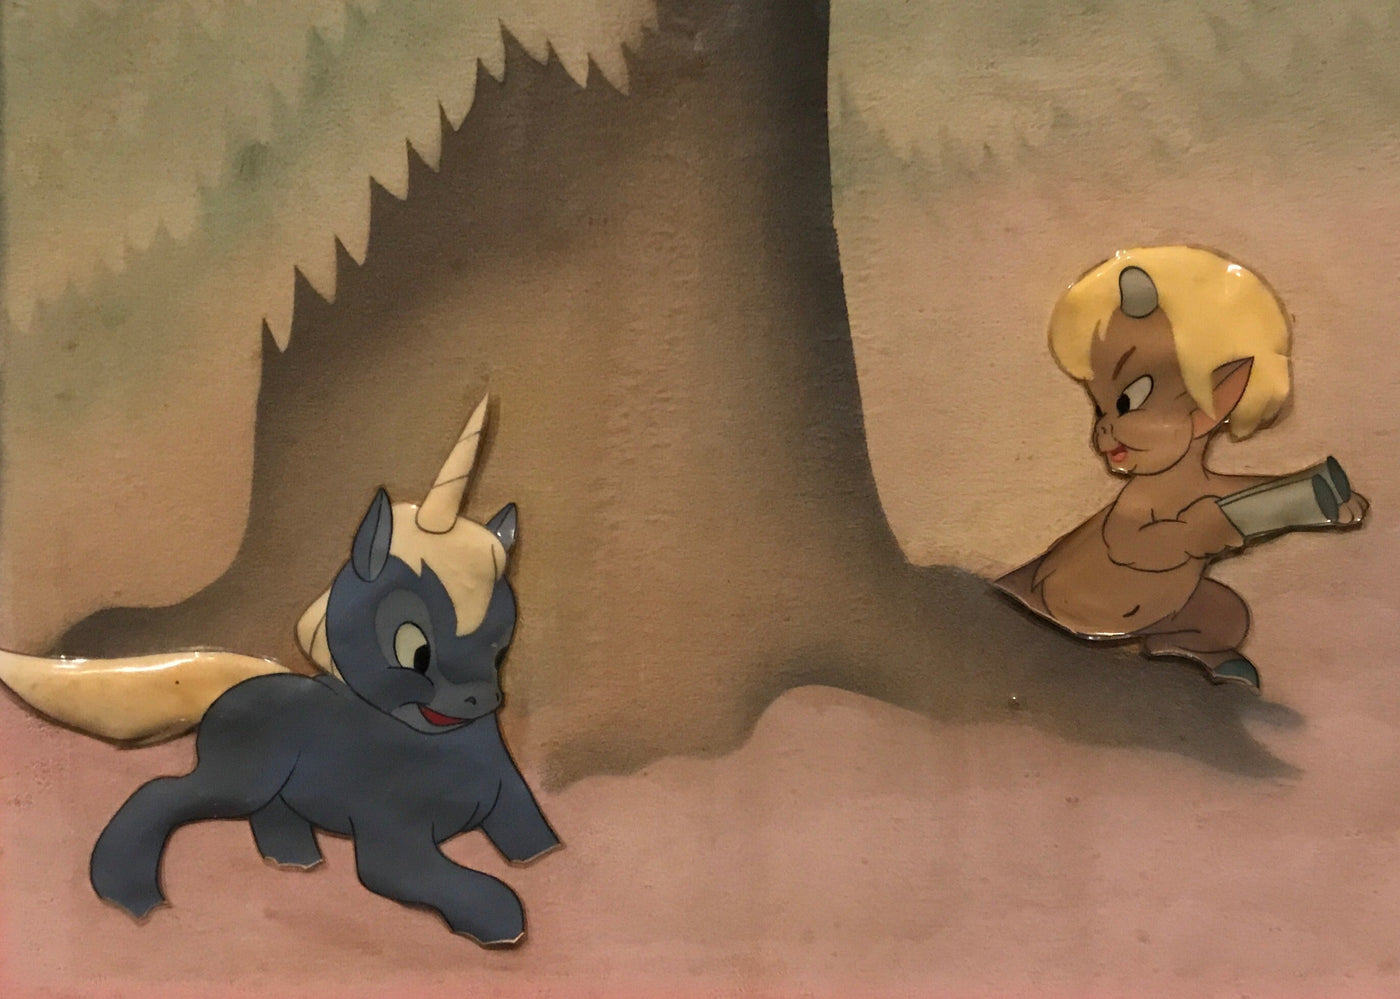 Original Walt Disney Production Cel on Courvoisier Background from Fantasia featuring Baby Pegasus and Satyr